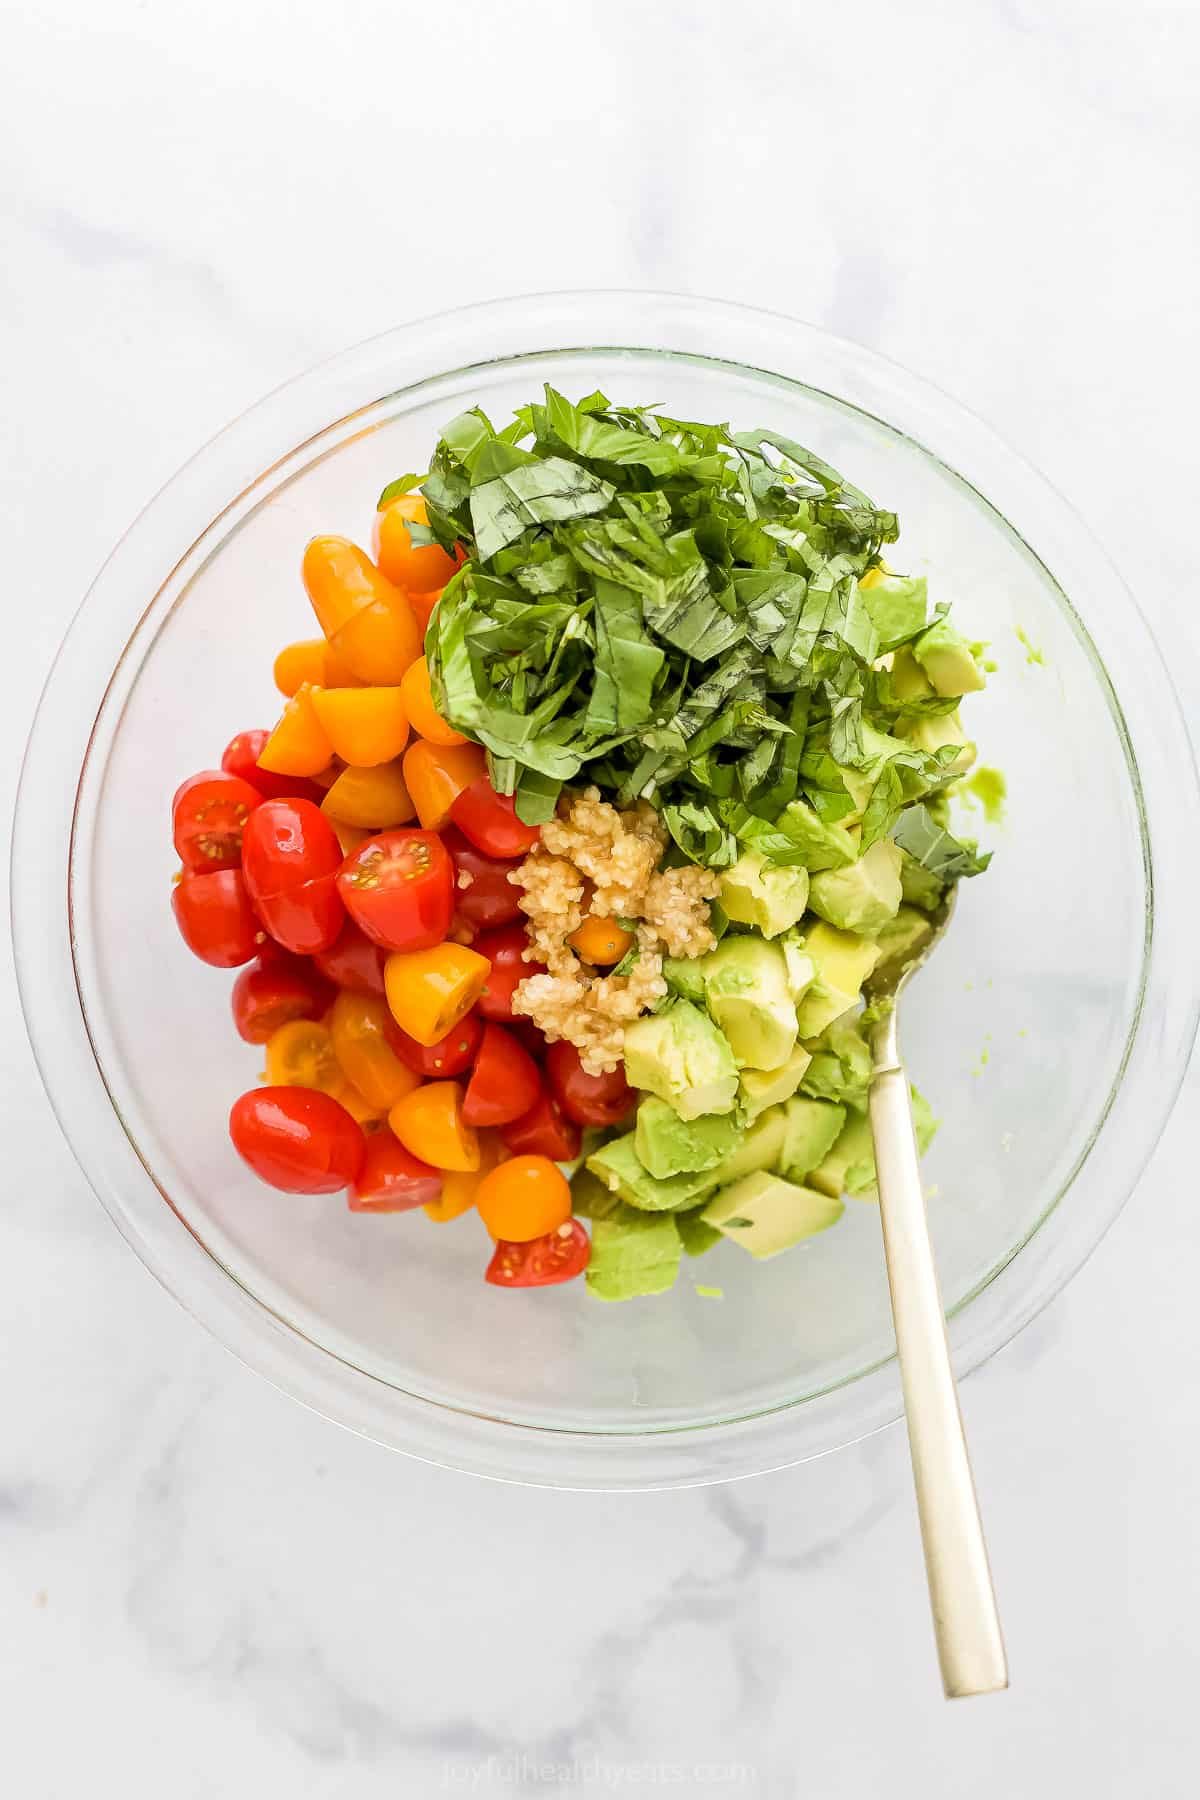 The prepared tomatoes, garlic, avocado and basil inside of a glass mixing bowl